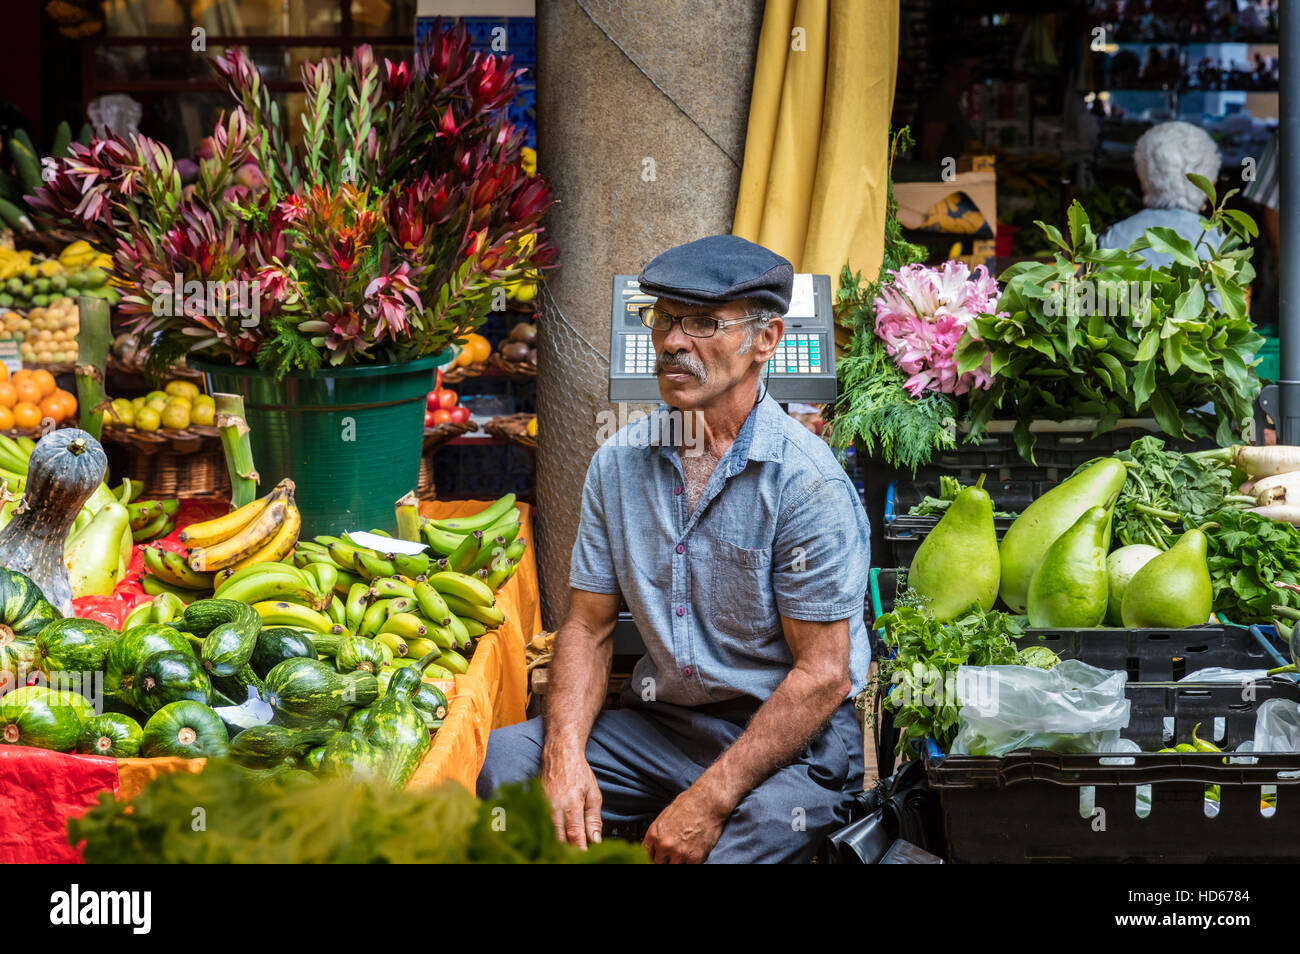 Grocer selling fruit, Market Hall, Funchal, Madeira, Portugal Stock Photo